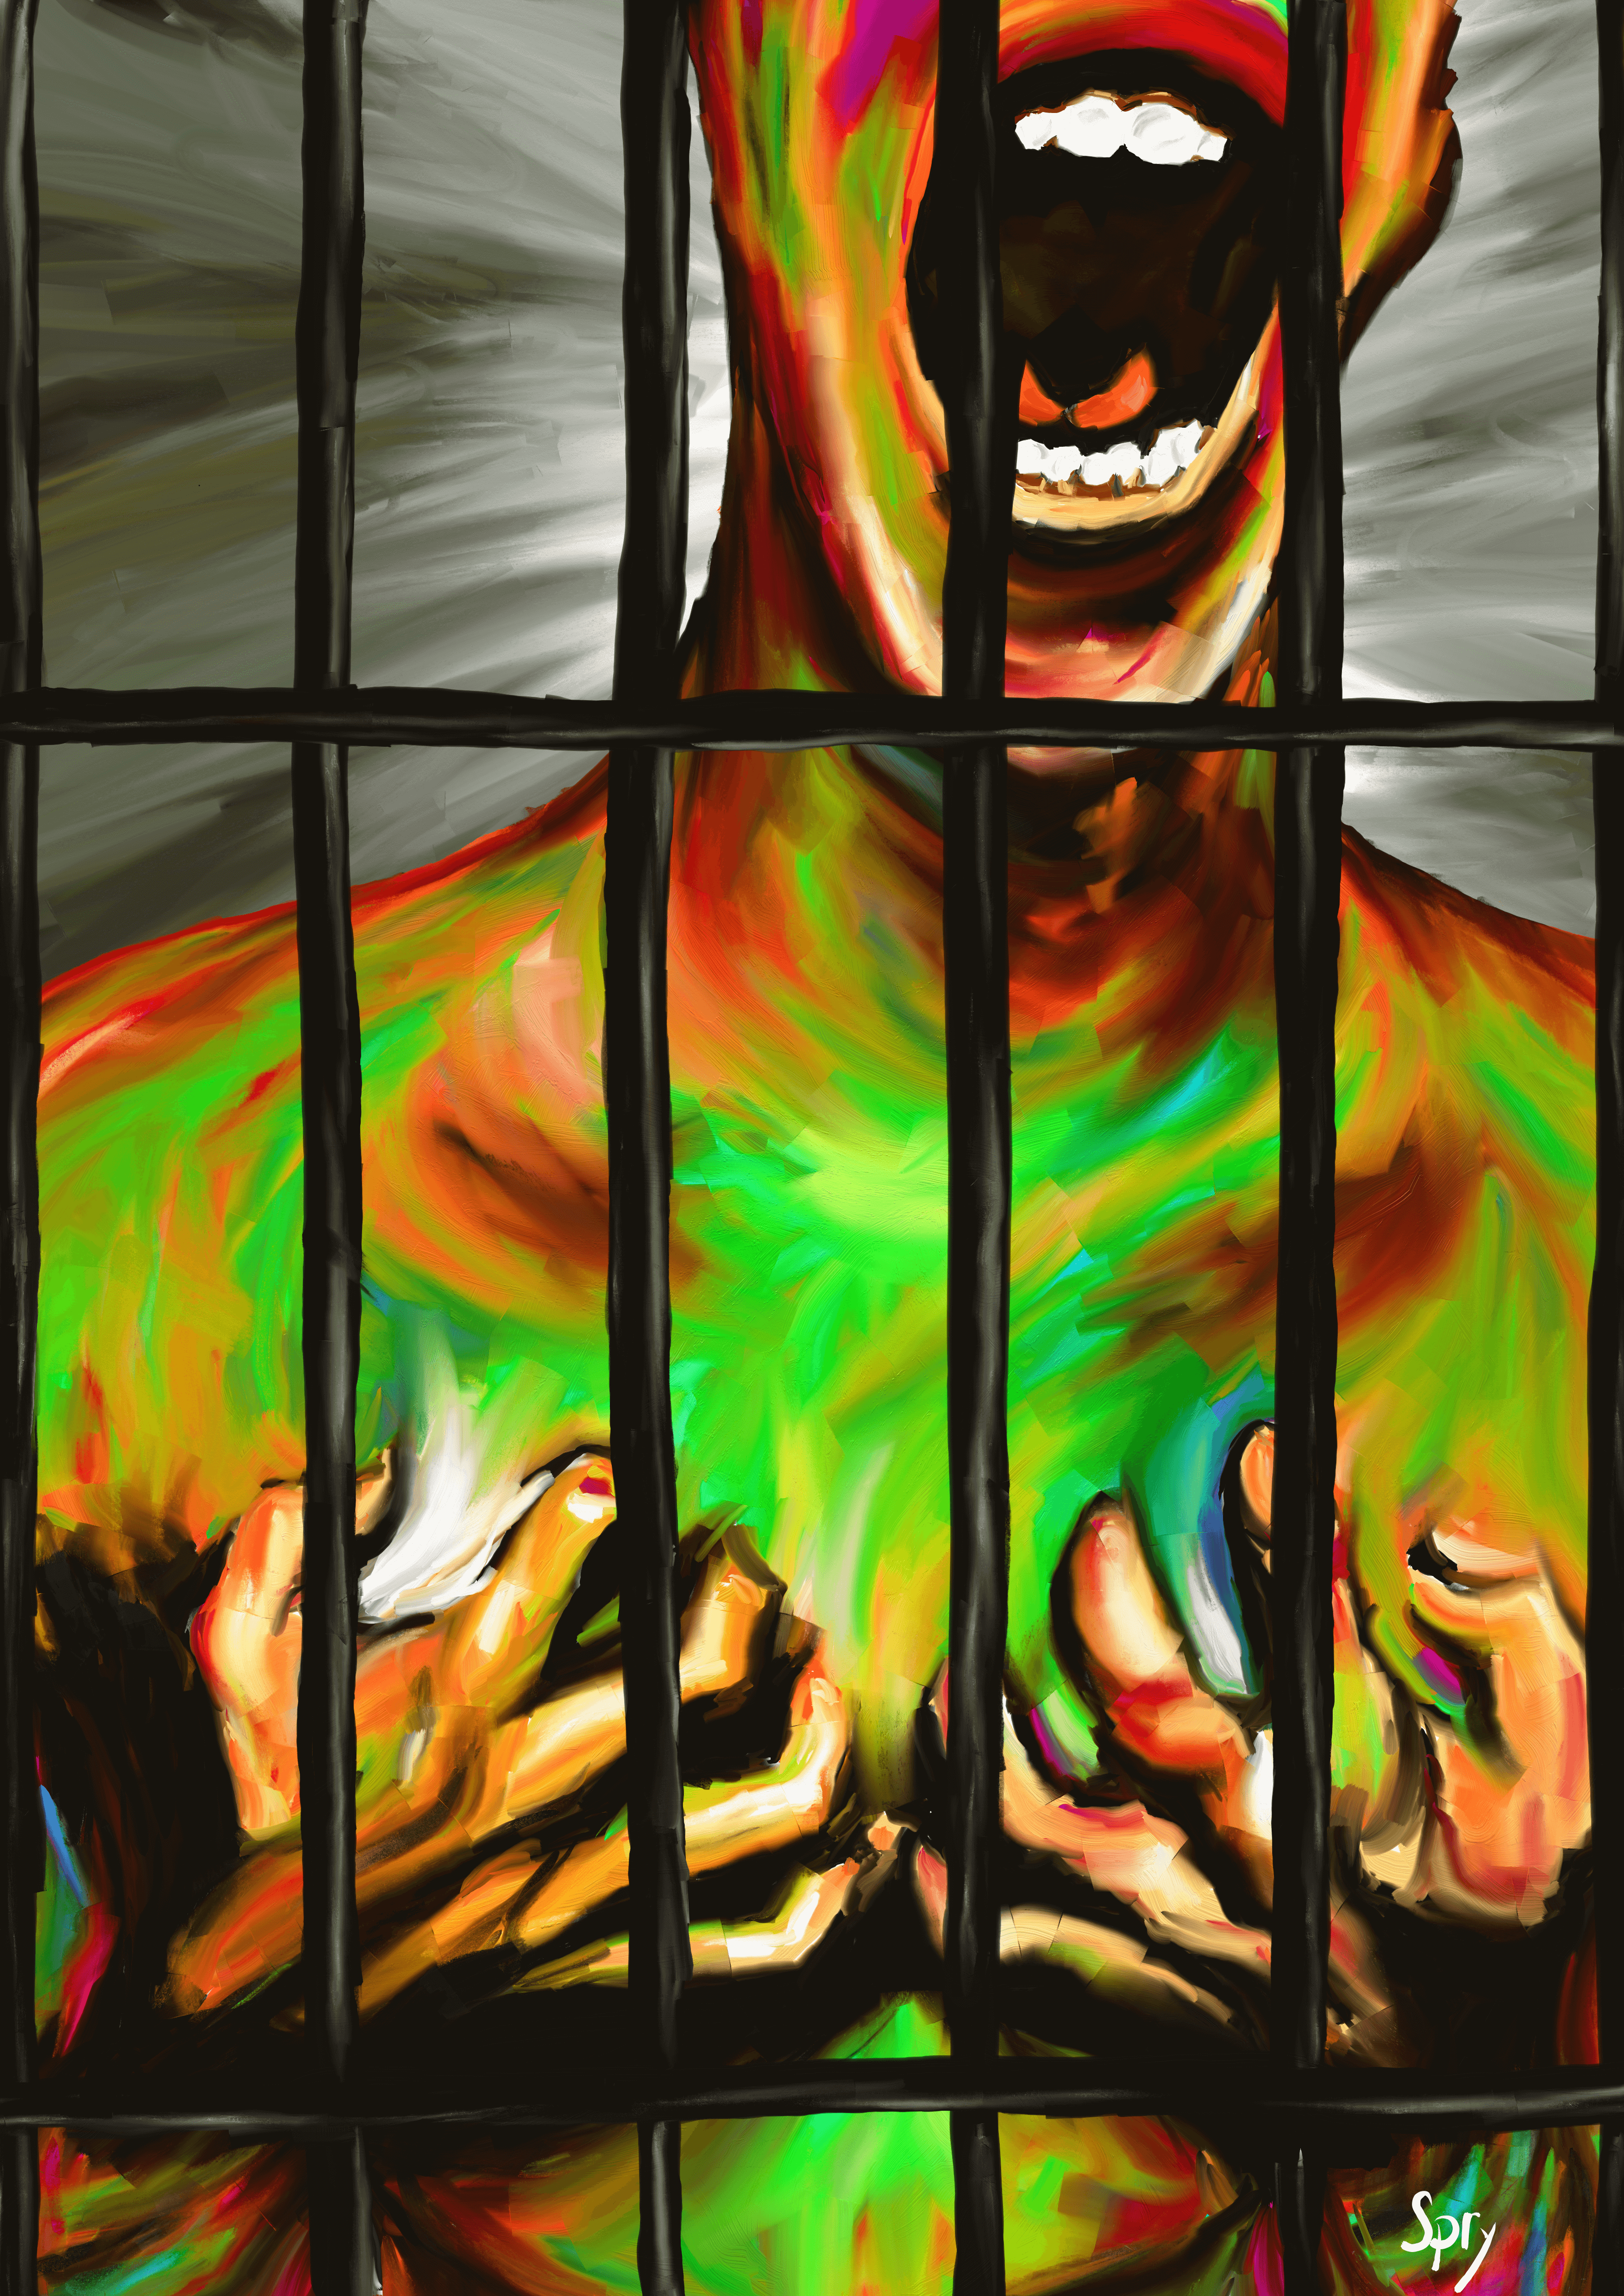 A person screaming behind bars and clutching their chest